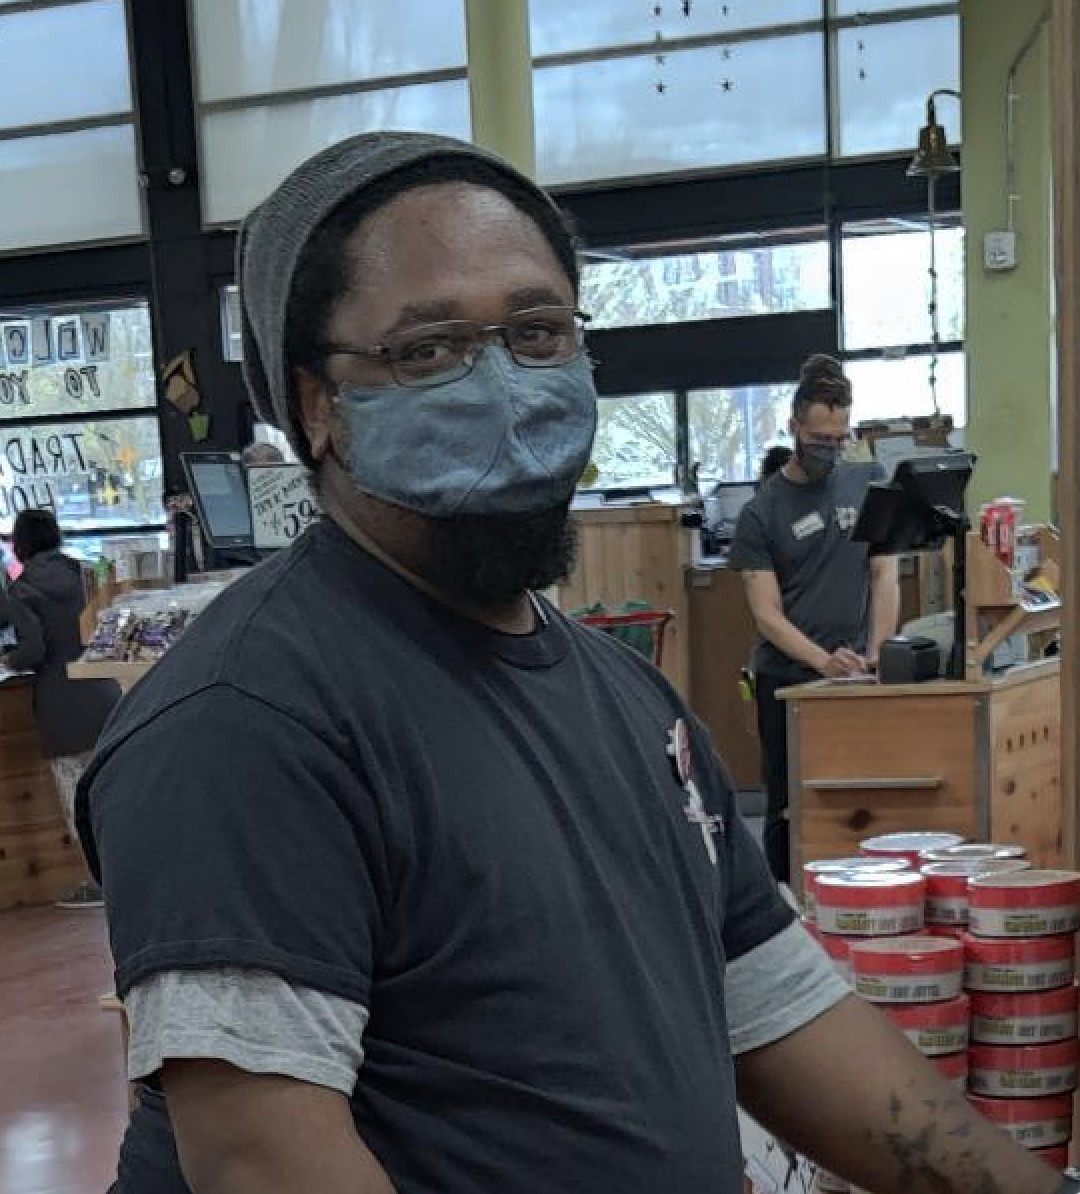 Jonathan, a young black man in a navy blue t-shirt, with a light blue mask, and a light gray beanie on stands smiling in Trader Joe's.